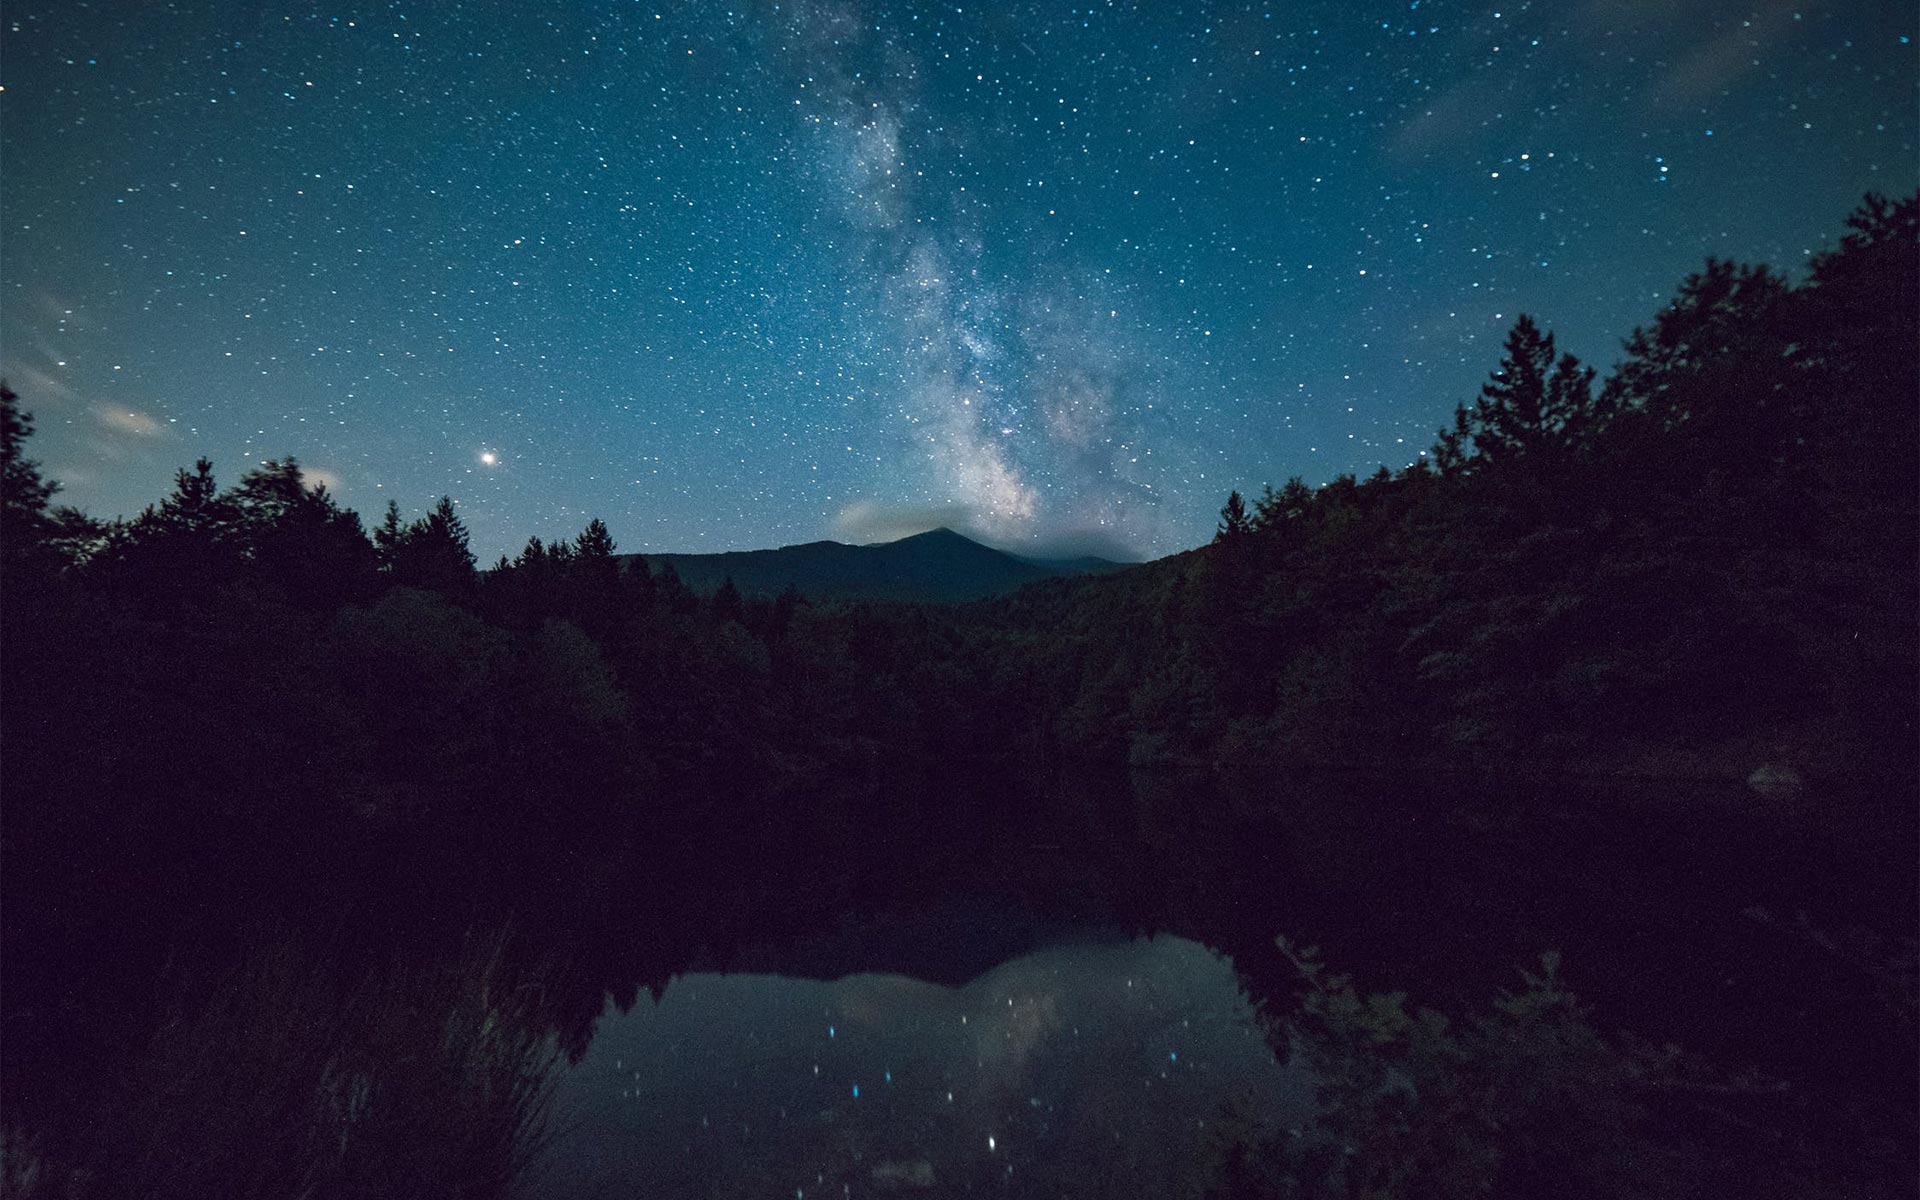 Stars over mountains and a lake